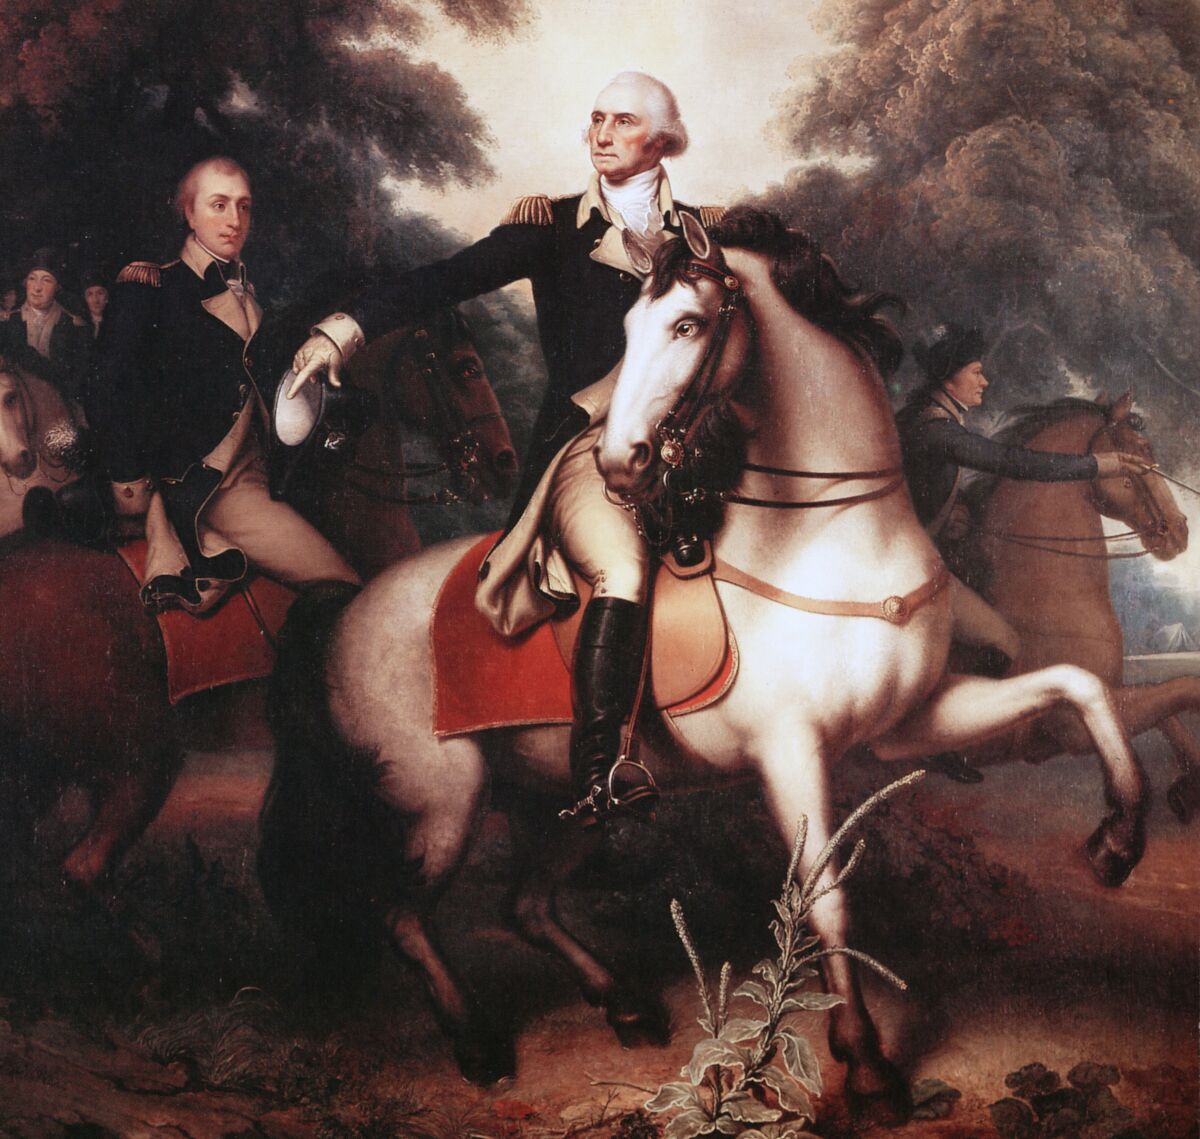 George Washington prepares for the final battle of the Revolutionary War in a portrait by Rembrandt Peale. To fight the British, Washington also had to fight smallpox — and made the tough decision to inoculate his troops.